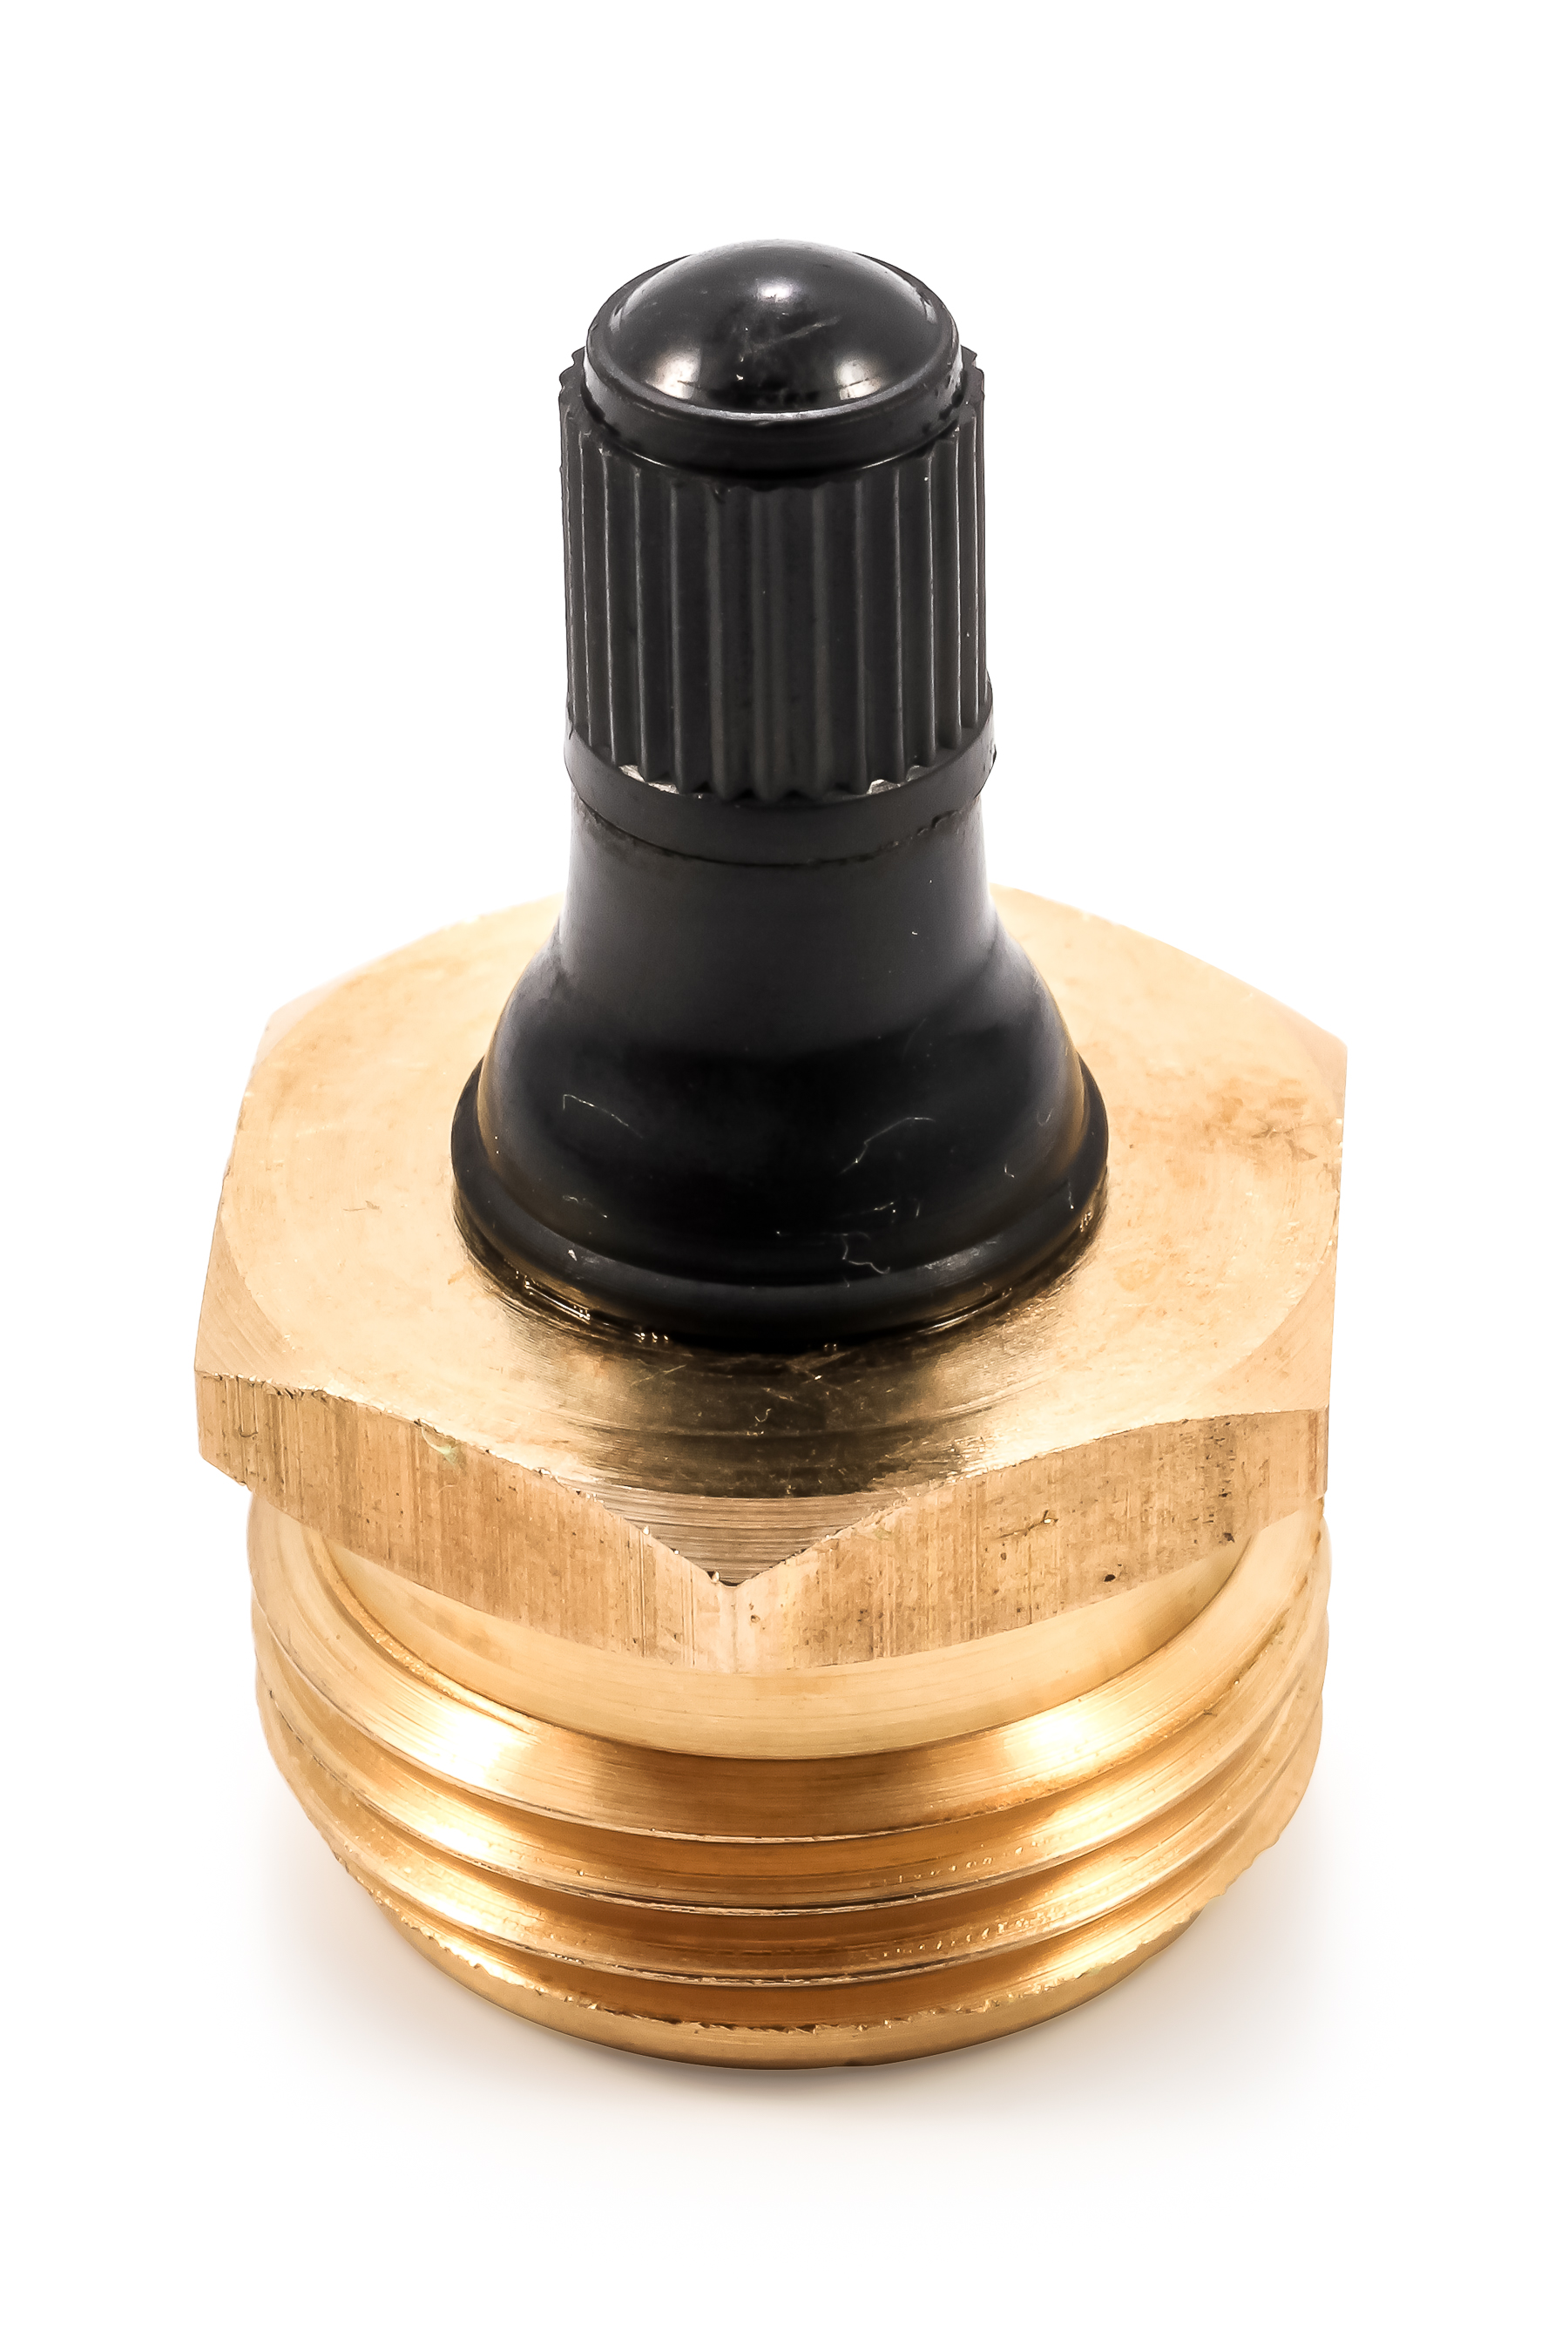 Camco 36153 Brass Blow Out Plug for RV Winterizing - image 3 of 9